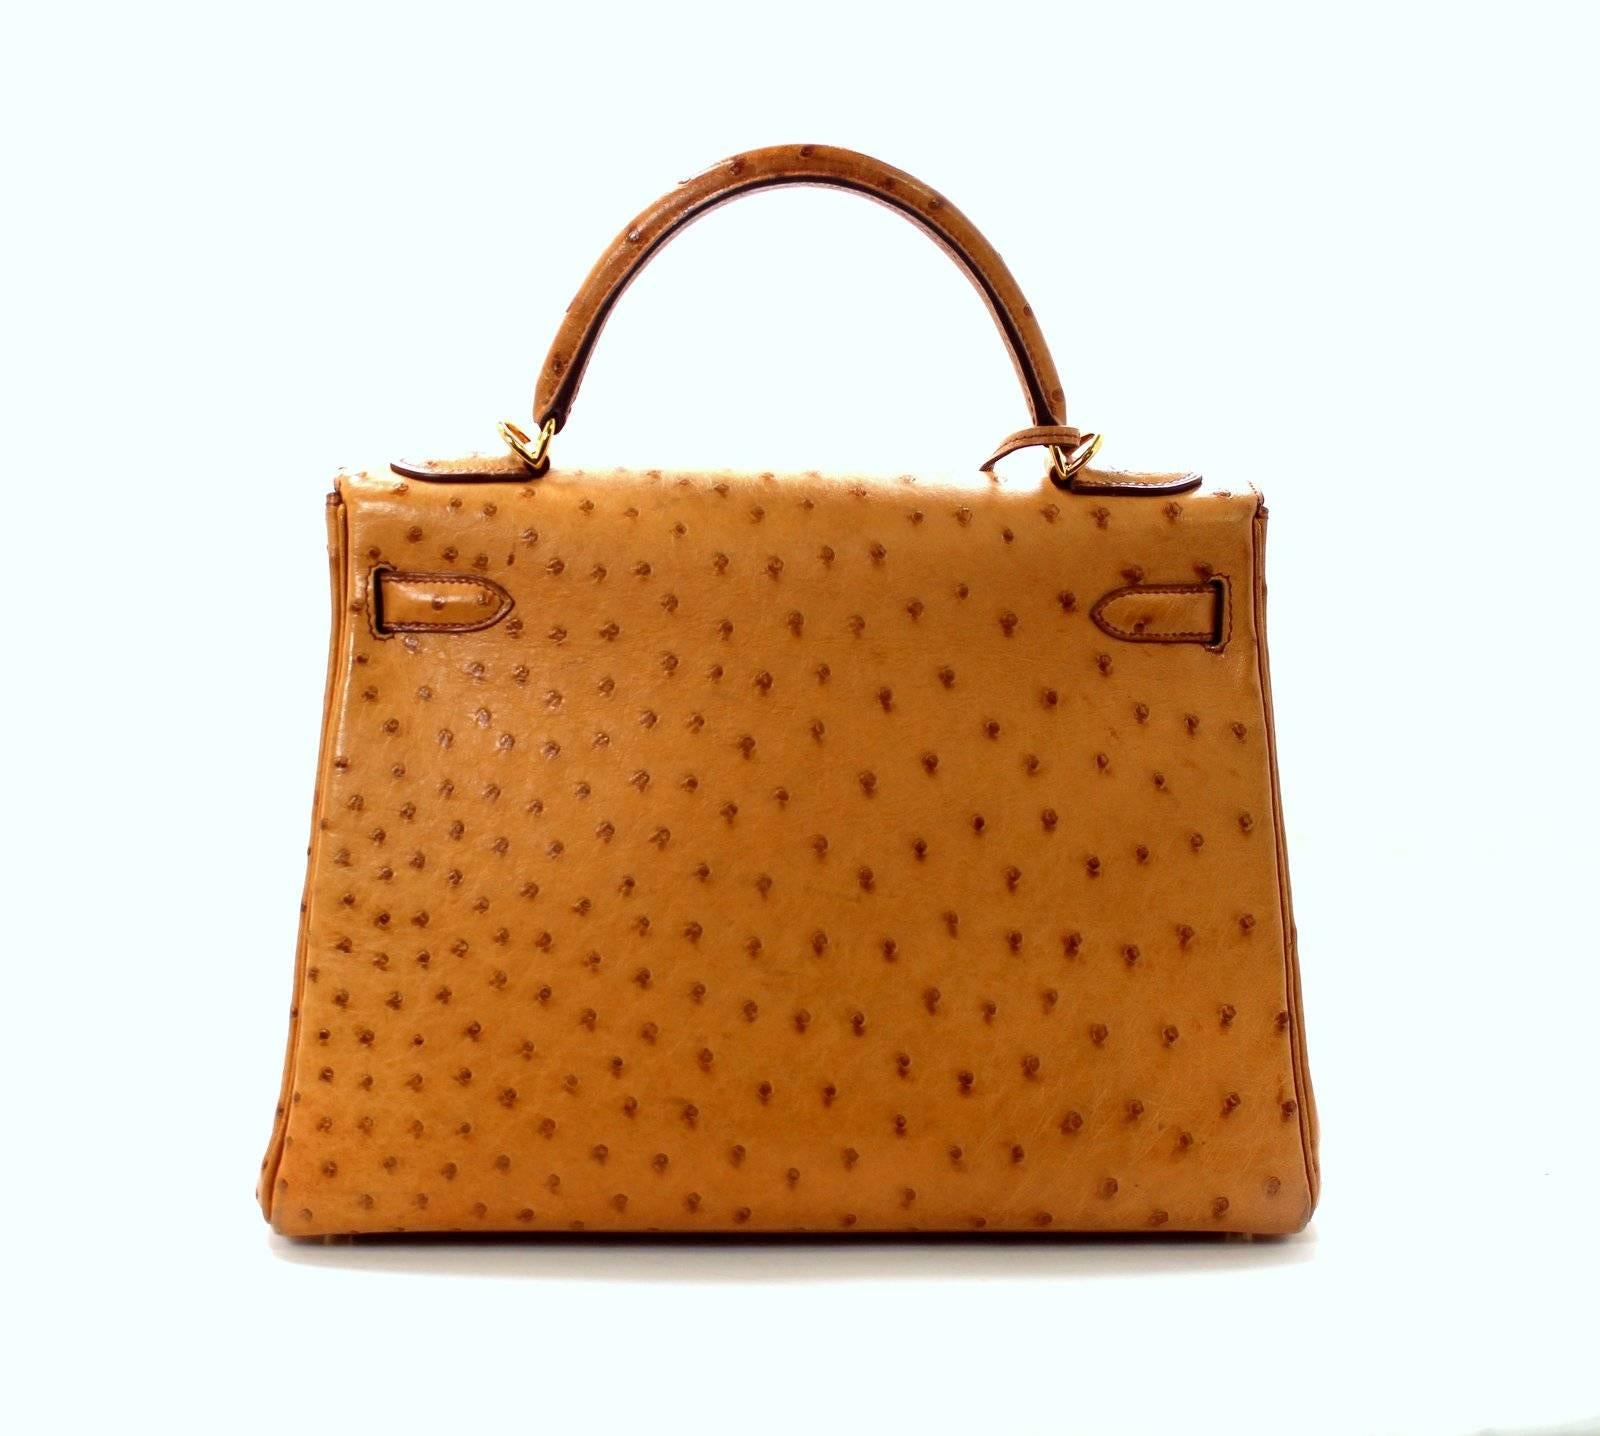 
EXCELLENT condition-   Hermès Kelly Bag in SAFFRON OSTRICH Skin with Gold Hardware, 32 cm size
Minor signs of wear on corners.  
Crafted by hand and considered by many as the epitome of luxury items, the classic Kelly bag is a highly coveted